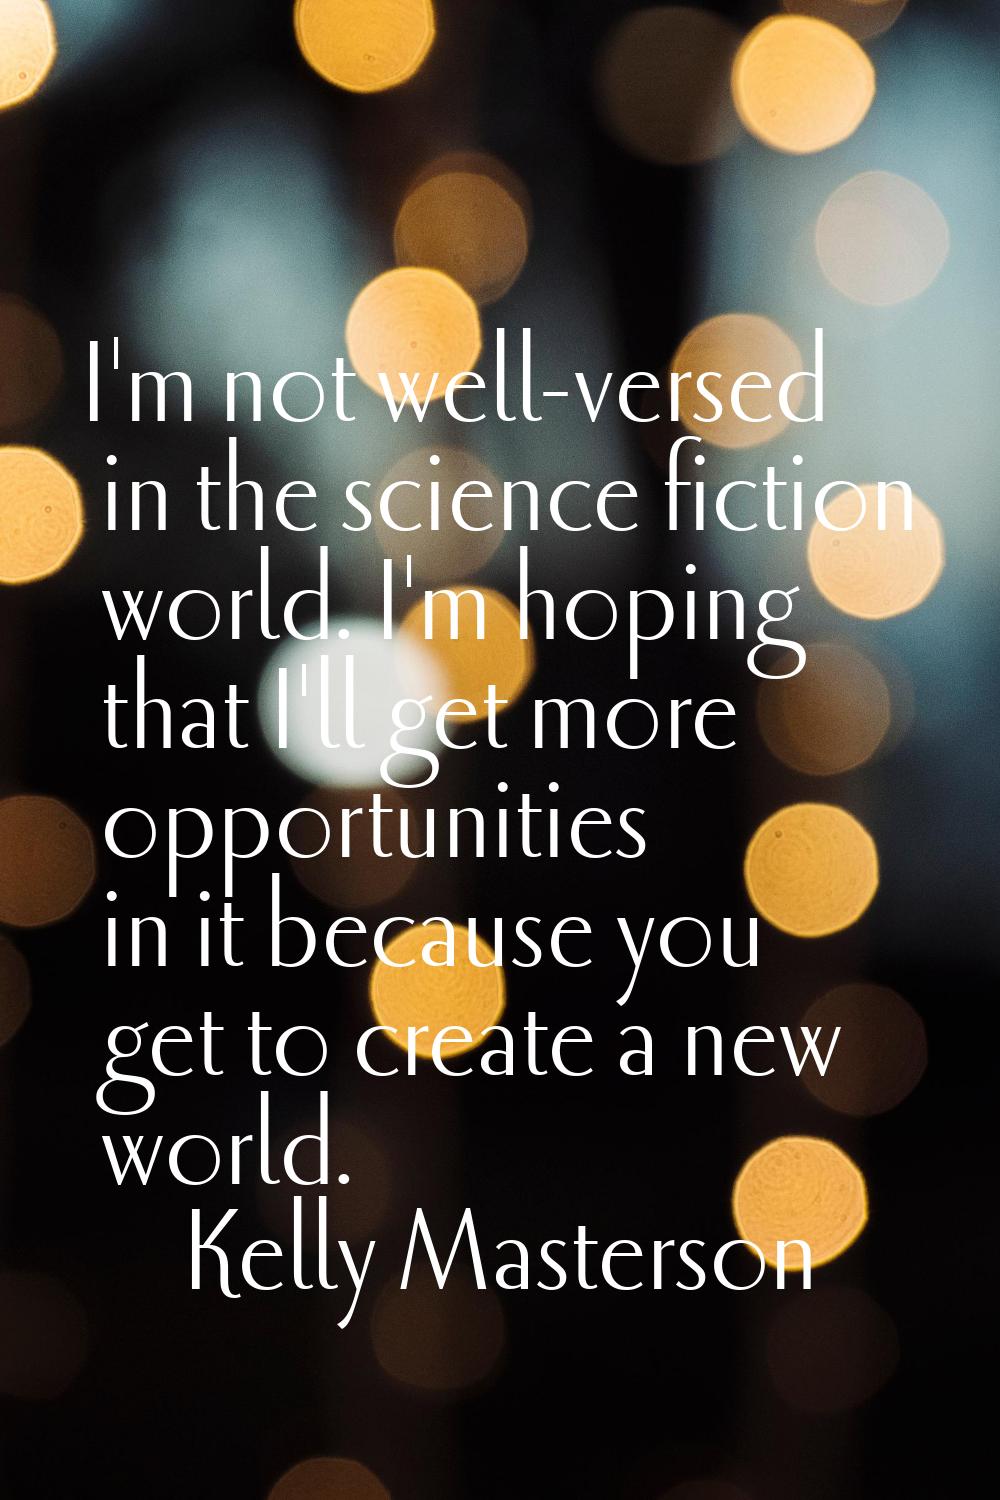 I'm not well-versed in the science fiction world. I'm hoping that I'll get more opportunities in it